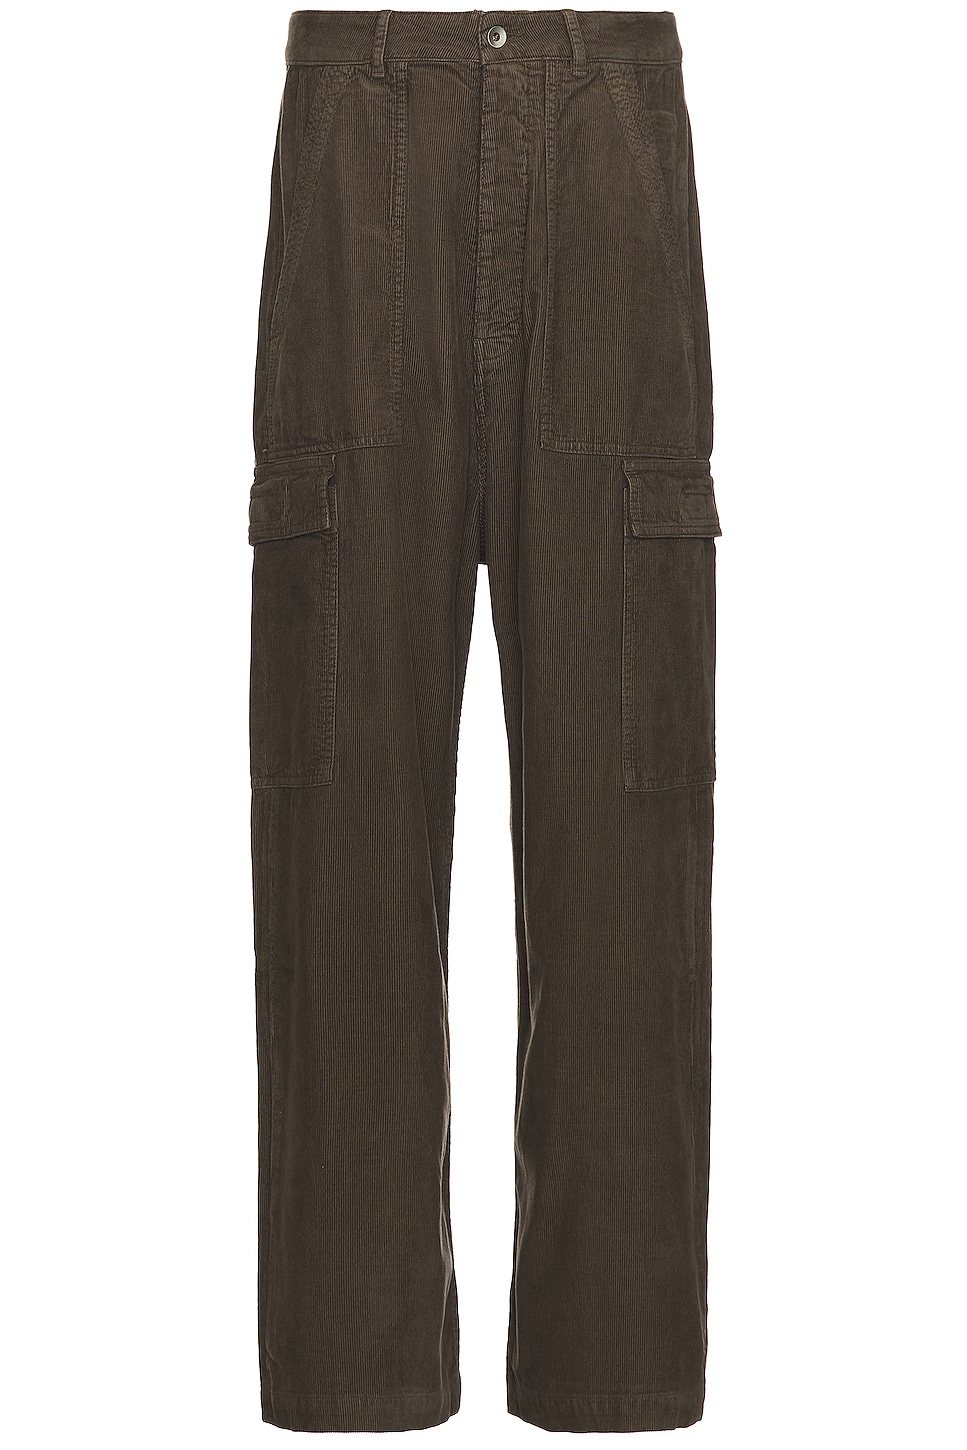 Image 1 of DRKSHDW by Rick Owens Cargo Trousers in Dust